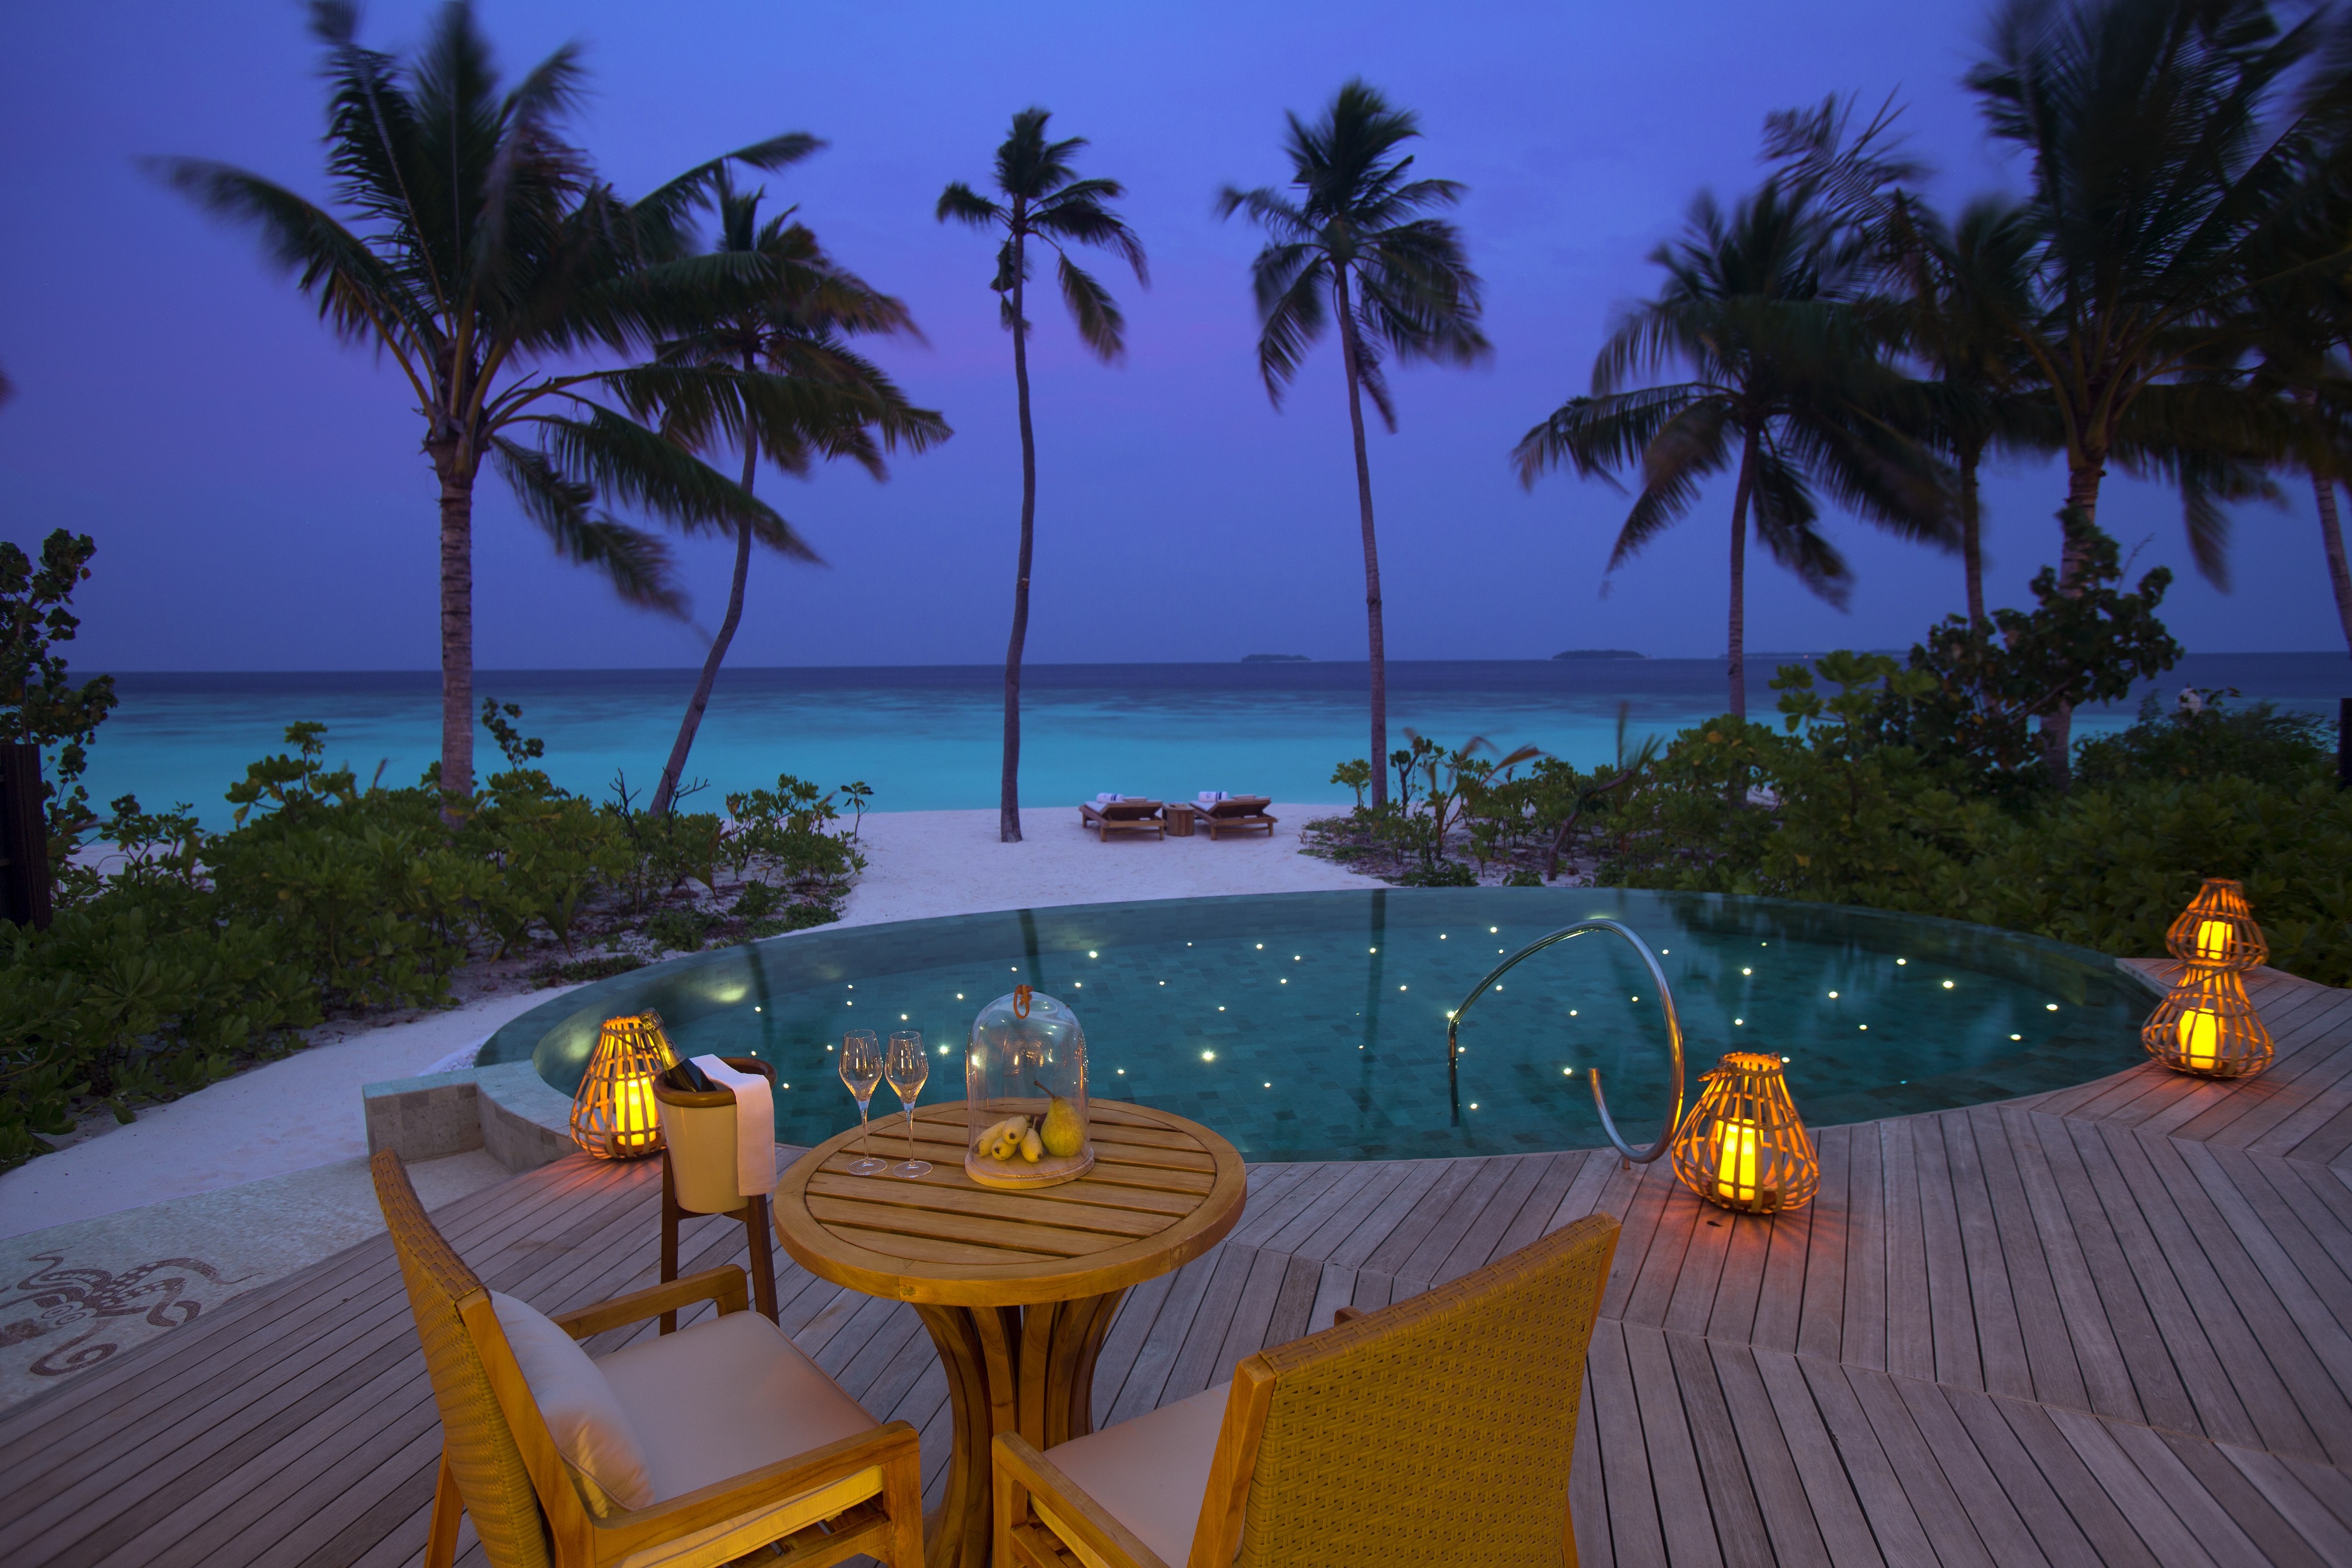 ocean view dining in the maldives - Maldives Resort Review: Milaidhoo by popular Chicago blogger Visions of Vogue